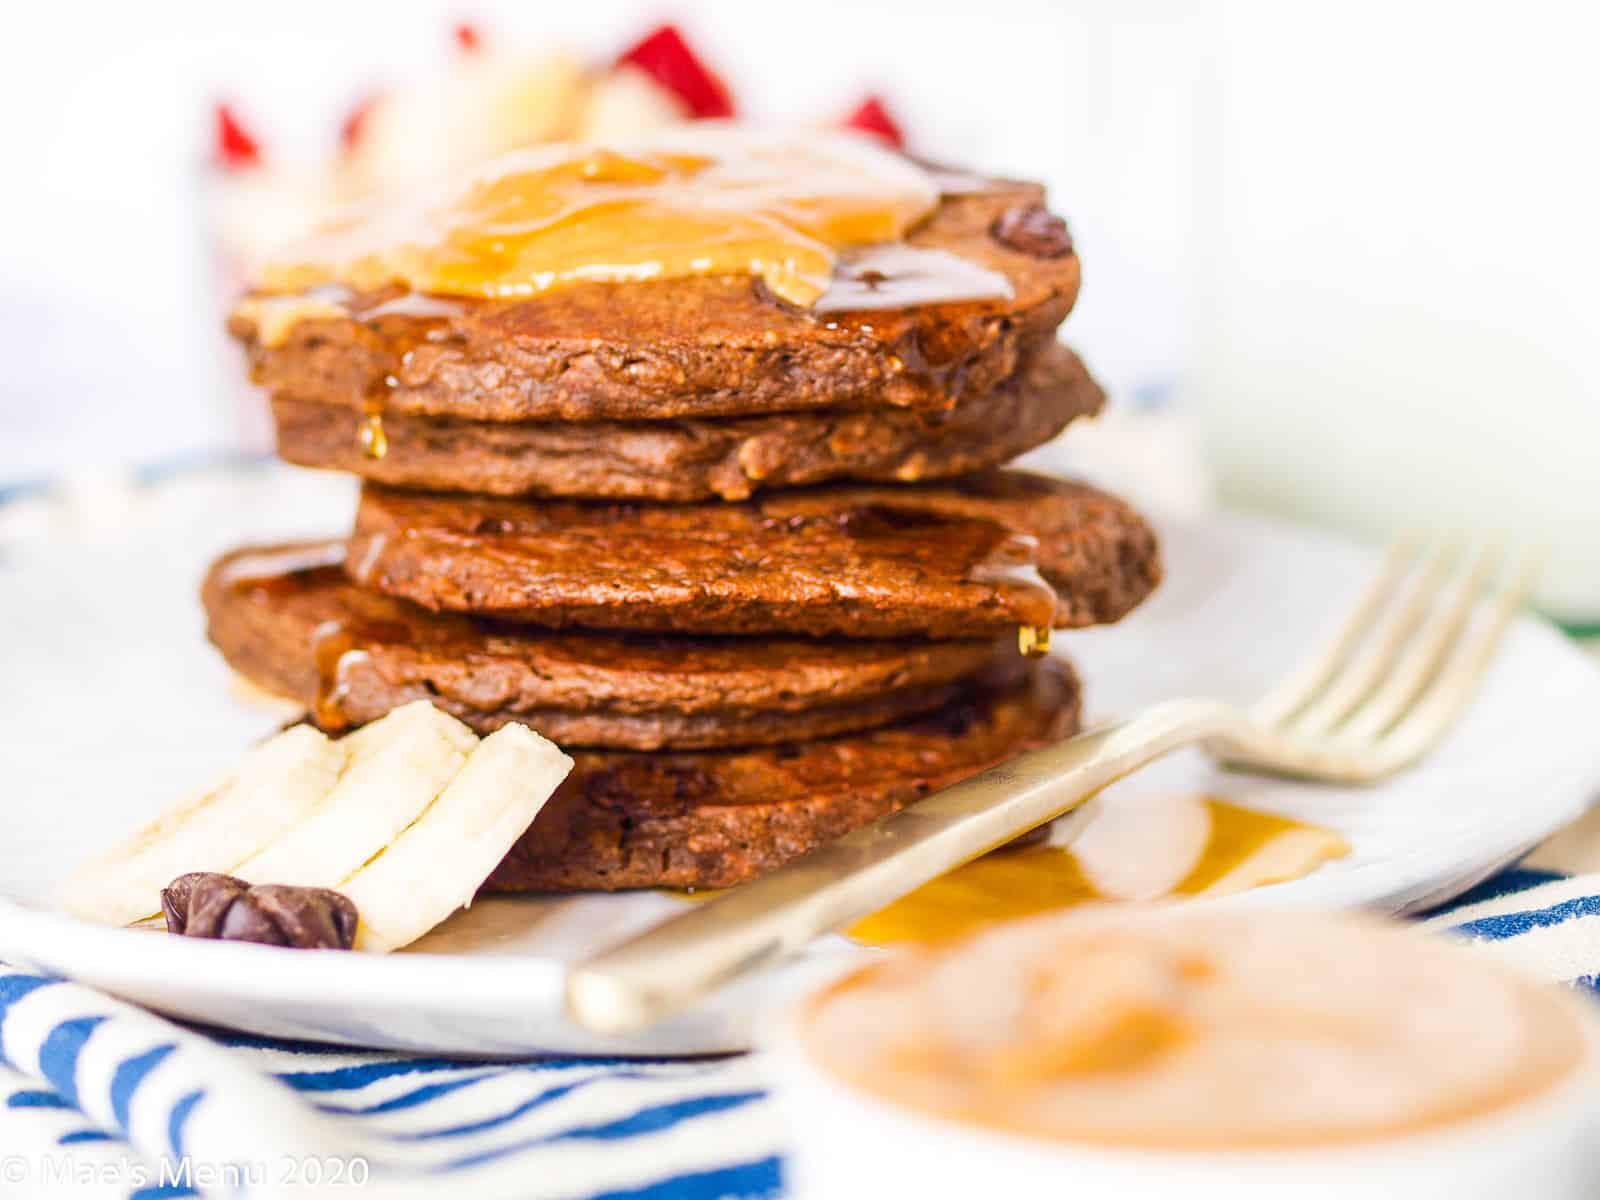 A stack of double chocolate chip banana pancakes with peanut butter and maple syrup on top. The pancakes sit on a white plate next to a fork.